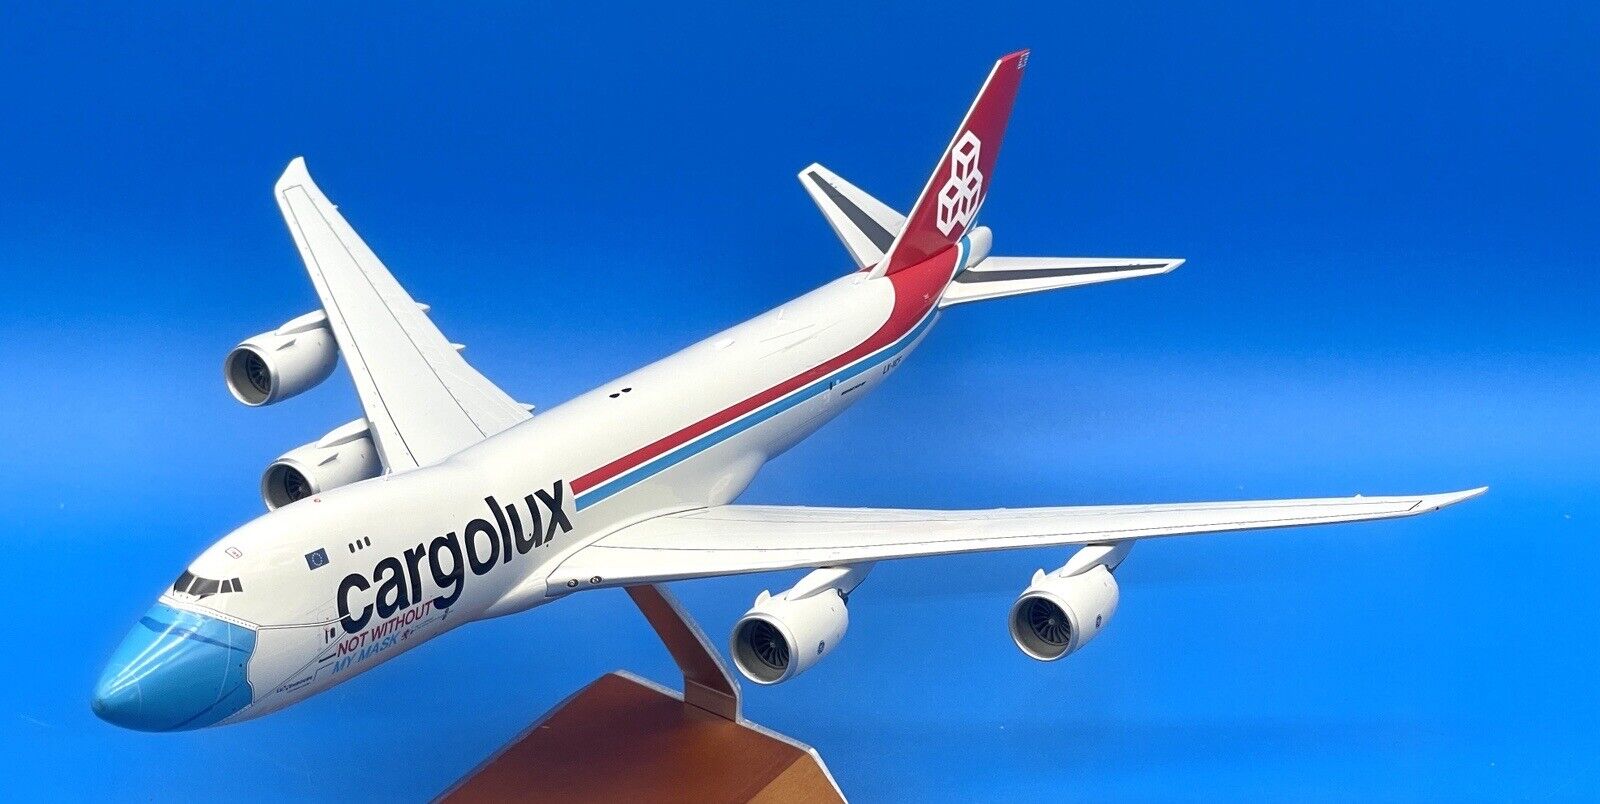 Cargolux Boeing 747-8F “NOT WITHOUT MY MASK” 1:200